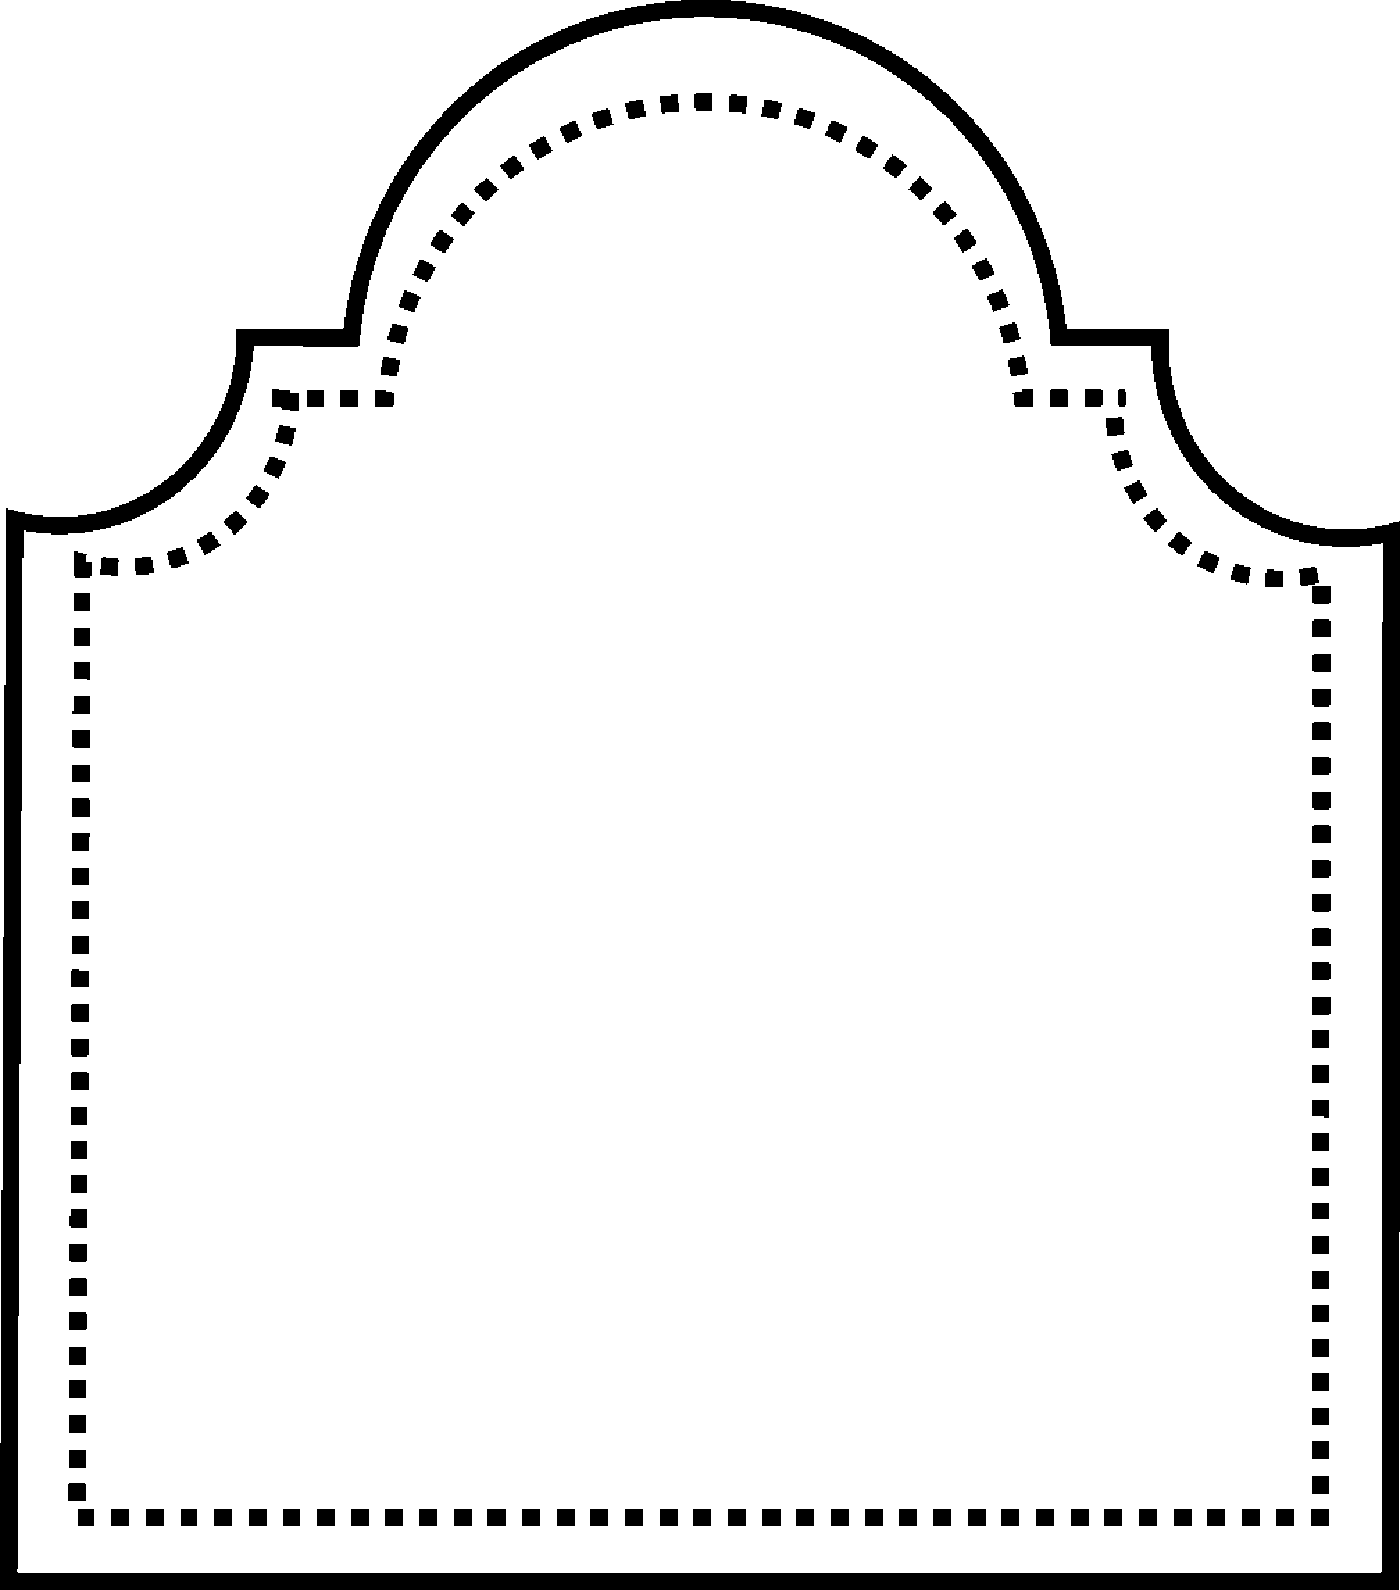 Free Gravestone Template, Download Free Gravestone Template png images